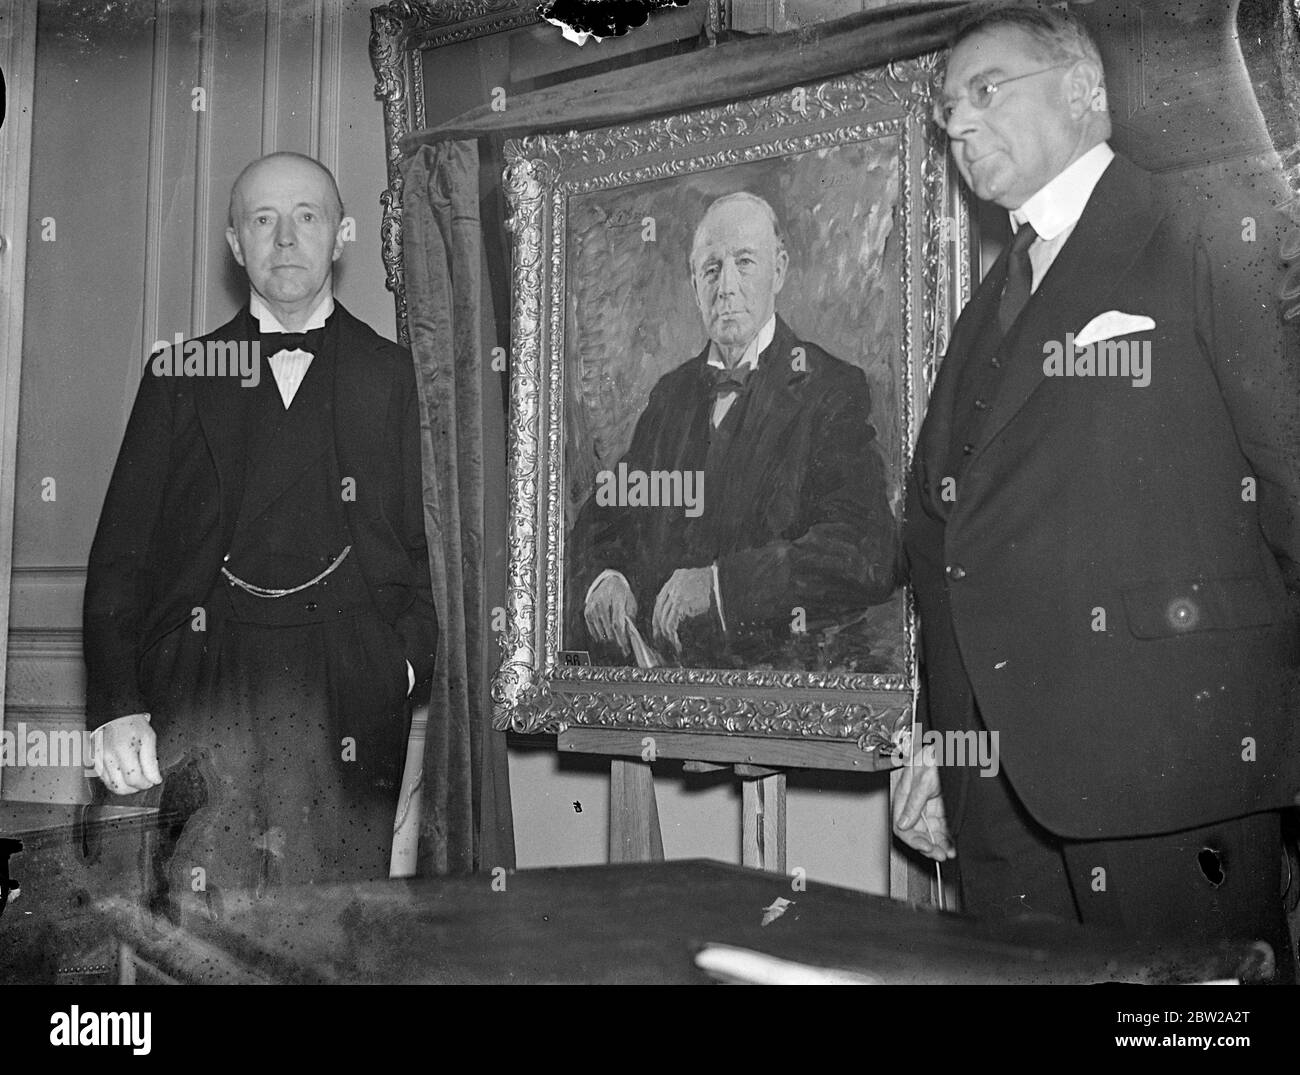 Portrait of Lord Runciman was unveiled by Sir Richard D Holt, President of the Chamber of Shipping, at the chamber of shipping, St Mary Axe City. Lord Runciman (left) with the portrait after the unveiling by Sir Richard D Holt (right) 28 October 1937 Stock Photo